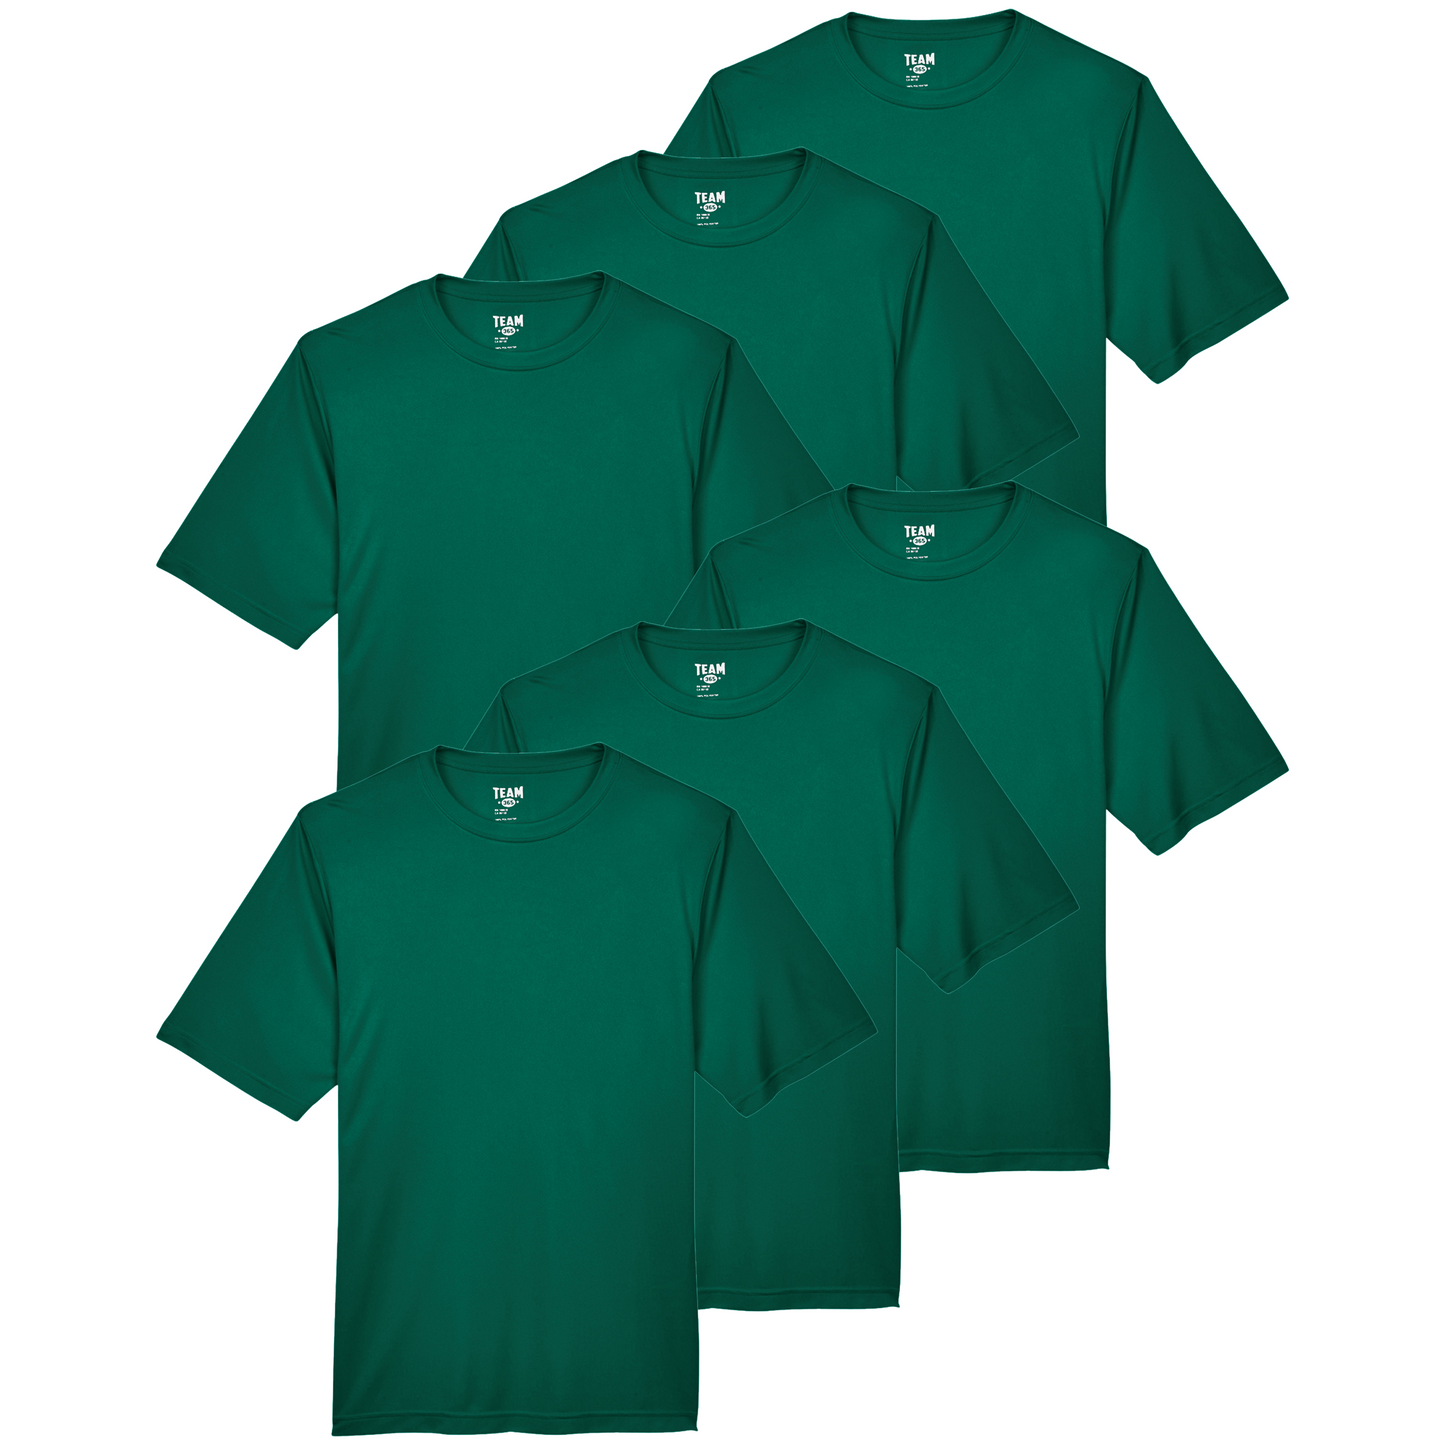 Team®365™ Men's SS Wholesale - Forest Green